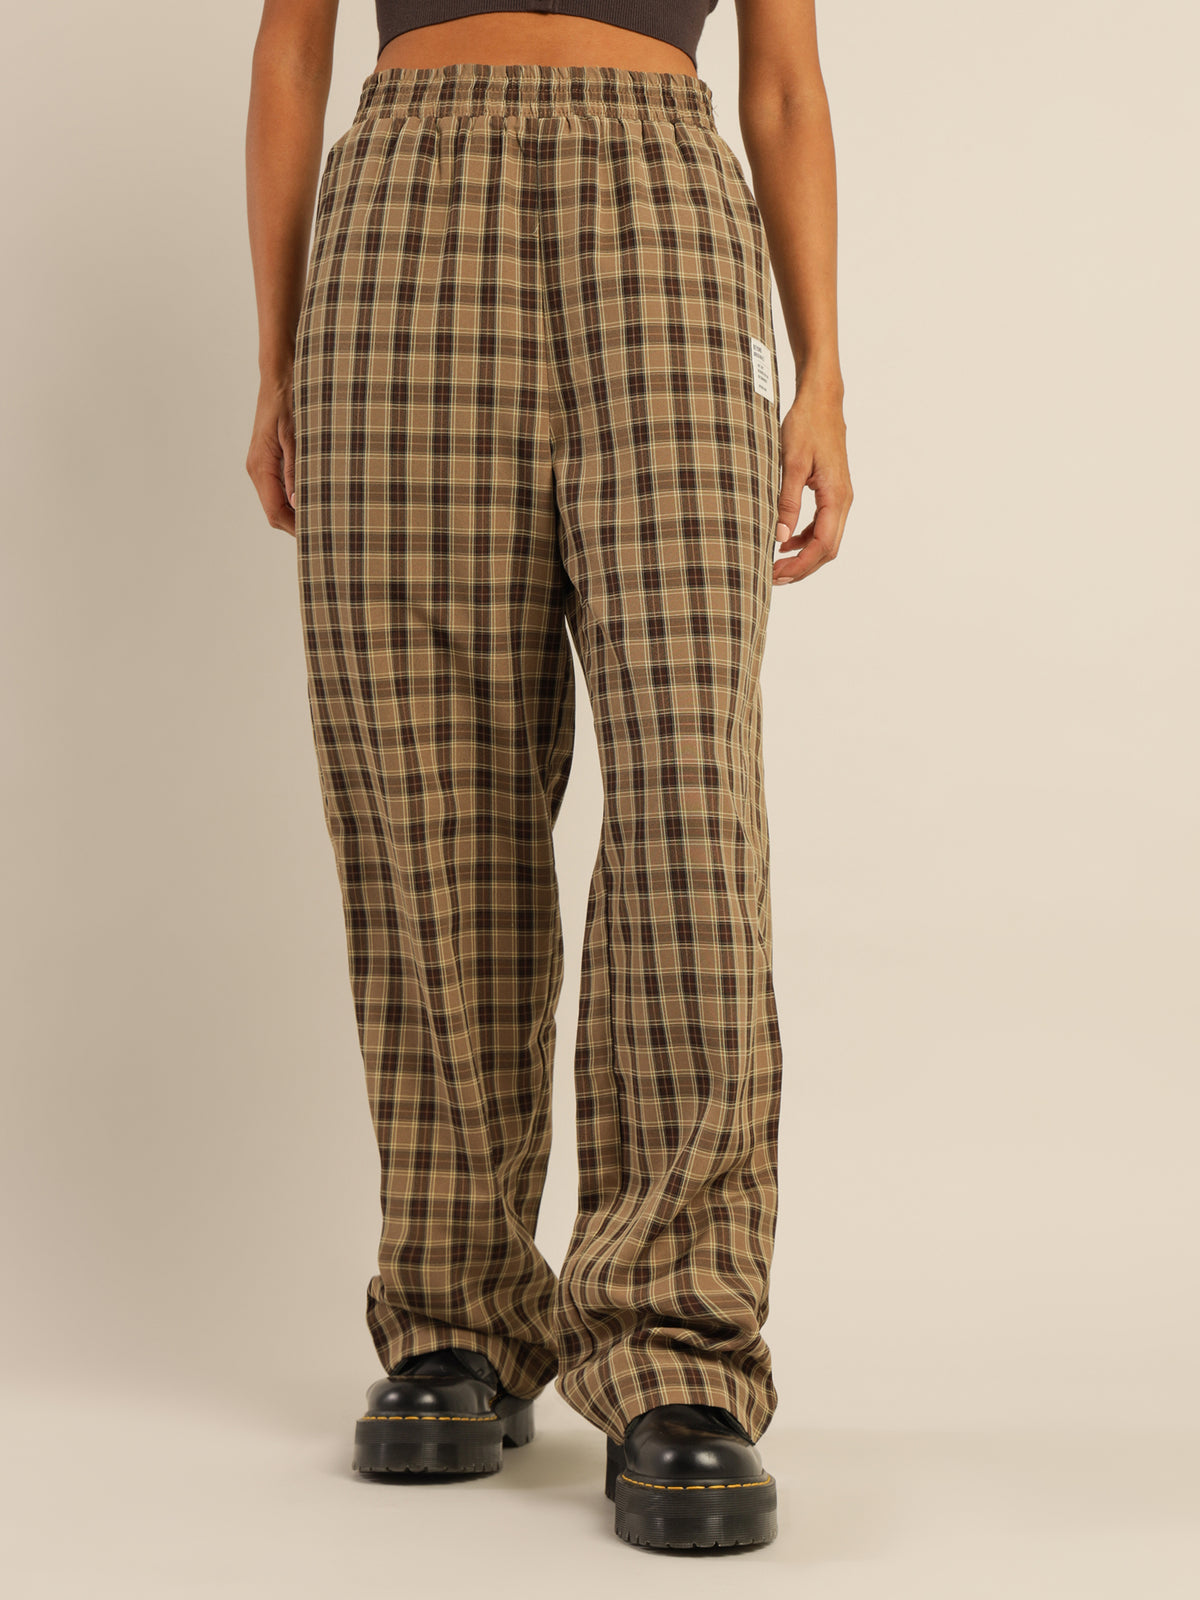 Adley Check Pants in Brown Check